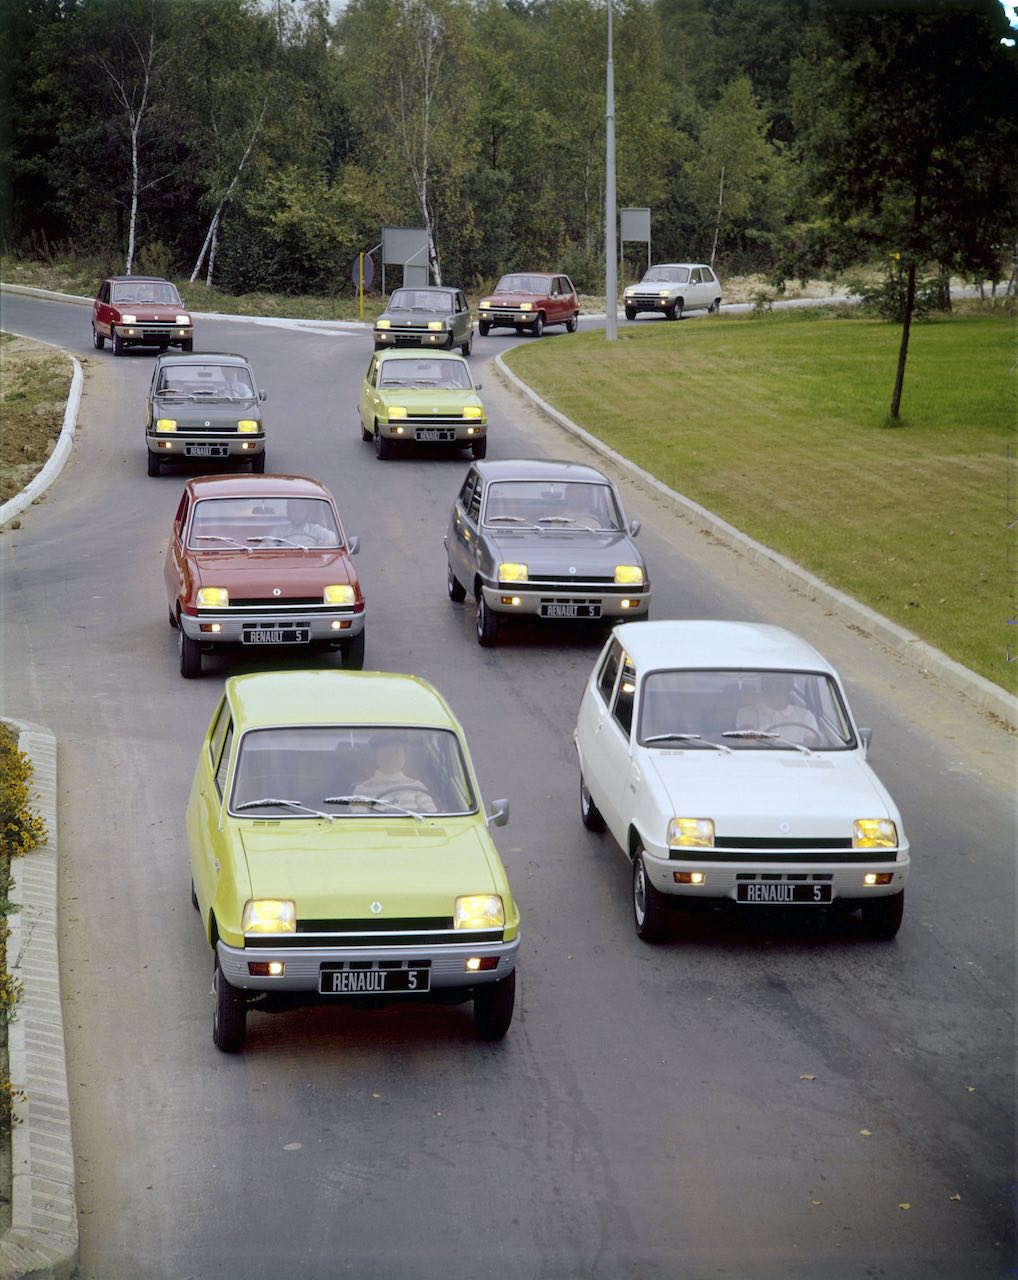 The story of the Renault 5 Prototype